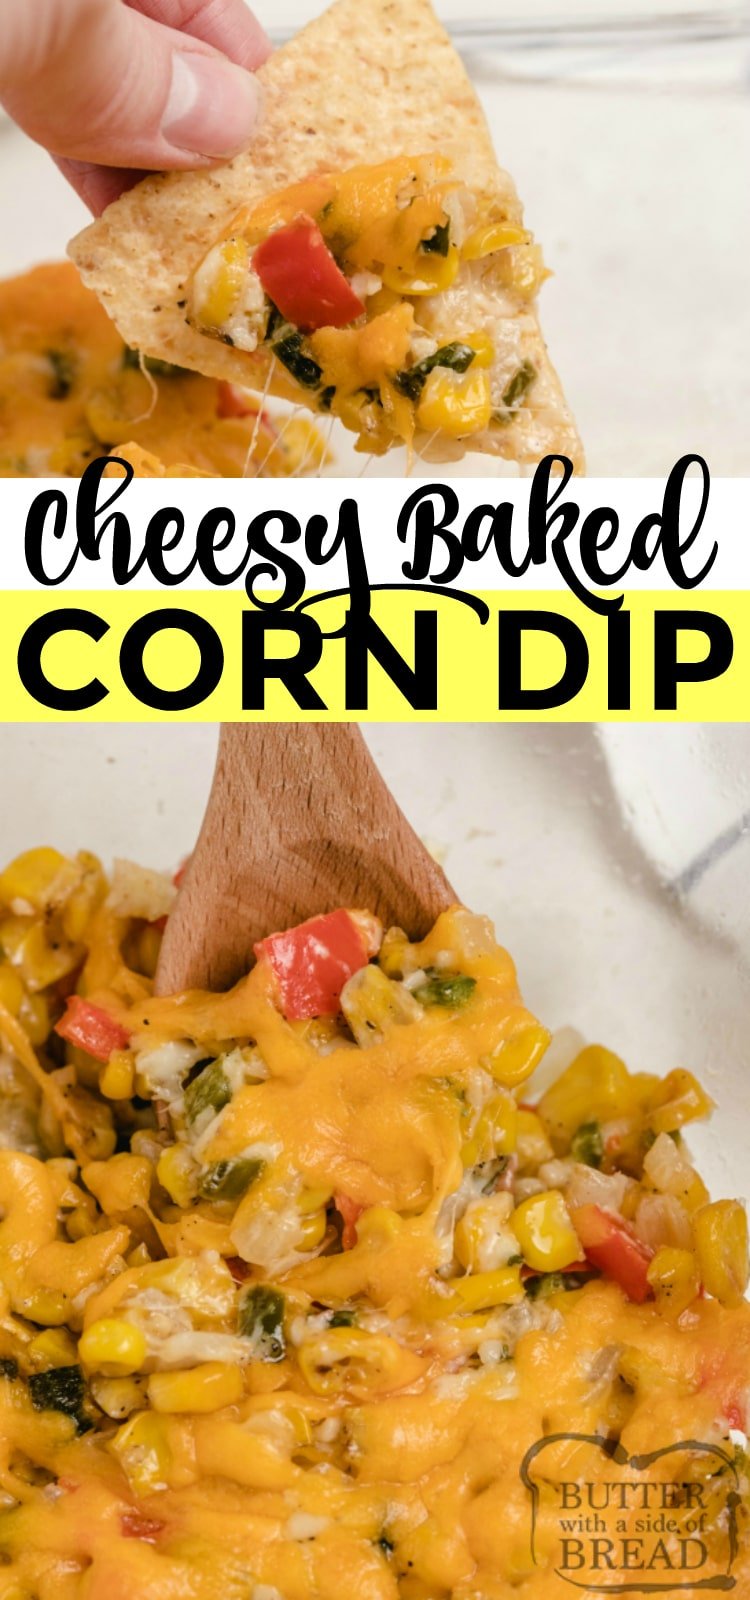 Cheesy Baked Corn Dip is full of fresh corn, veggies and cheese for an easy corn dip recipe that is bursting with flavor. Perfect chip dip that everyone will love!